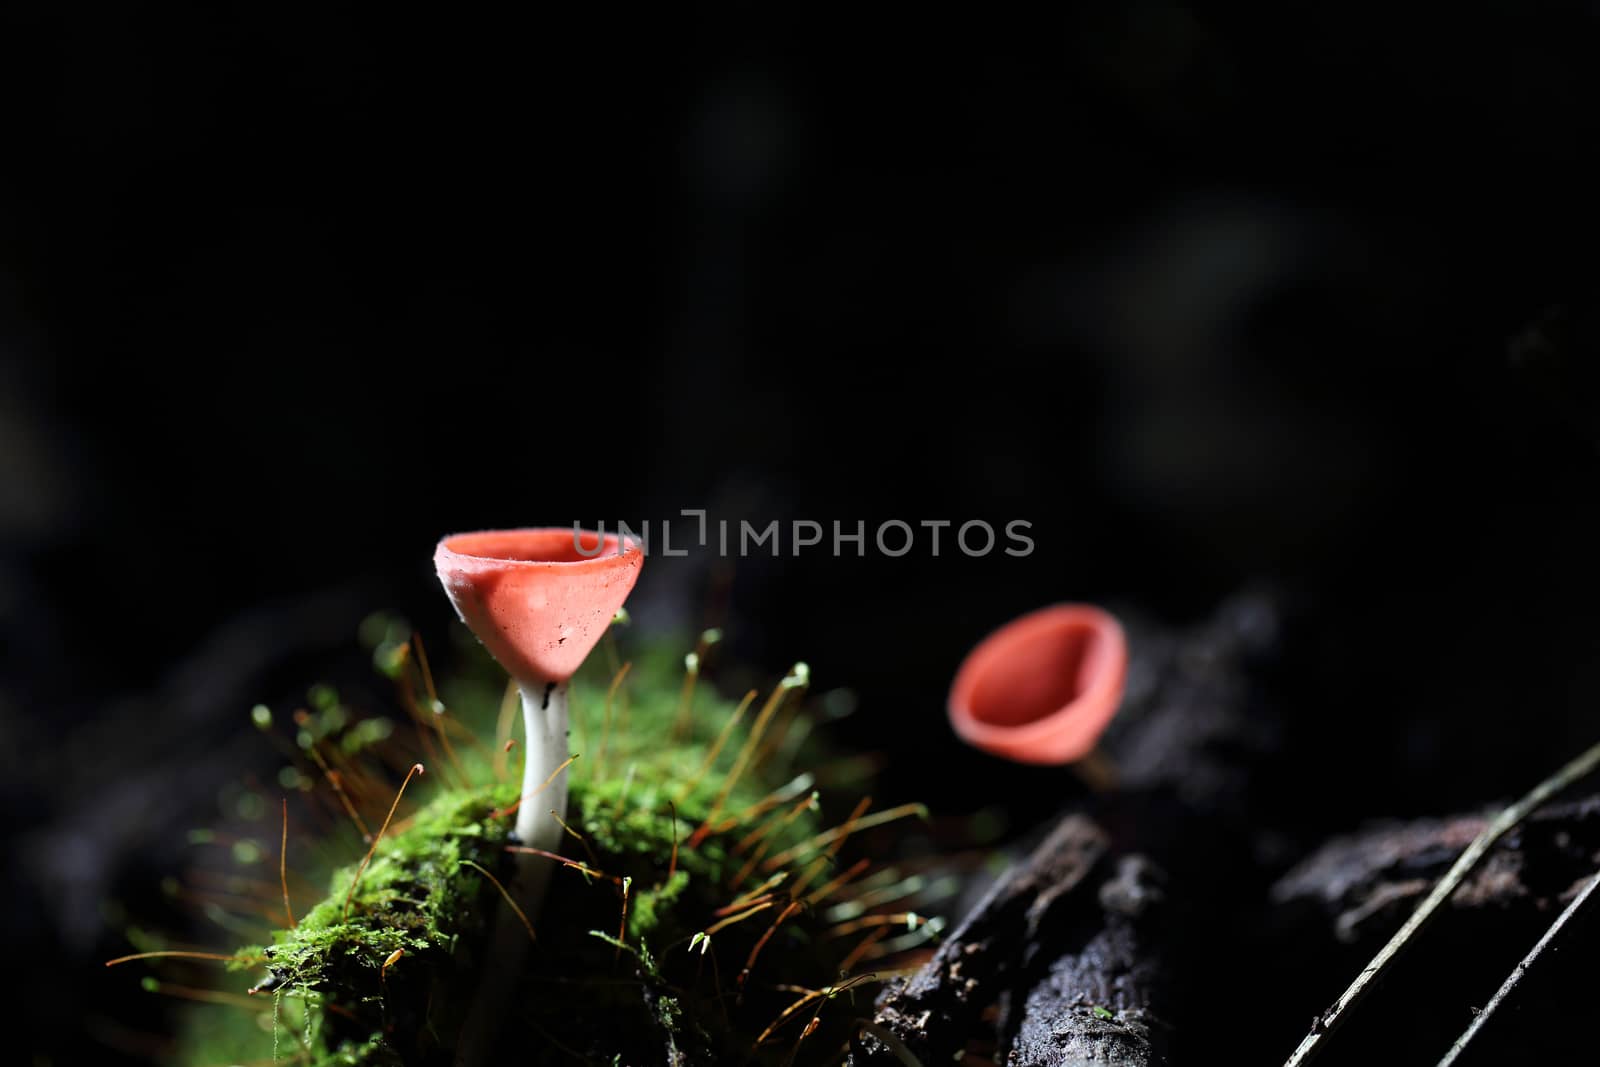 Cookeina sulcipes Fungi cup in close up